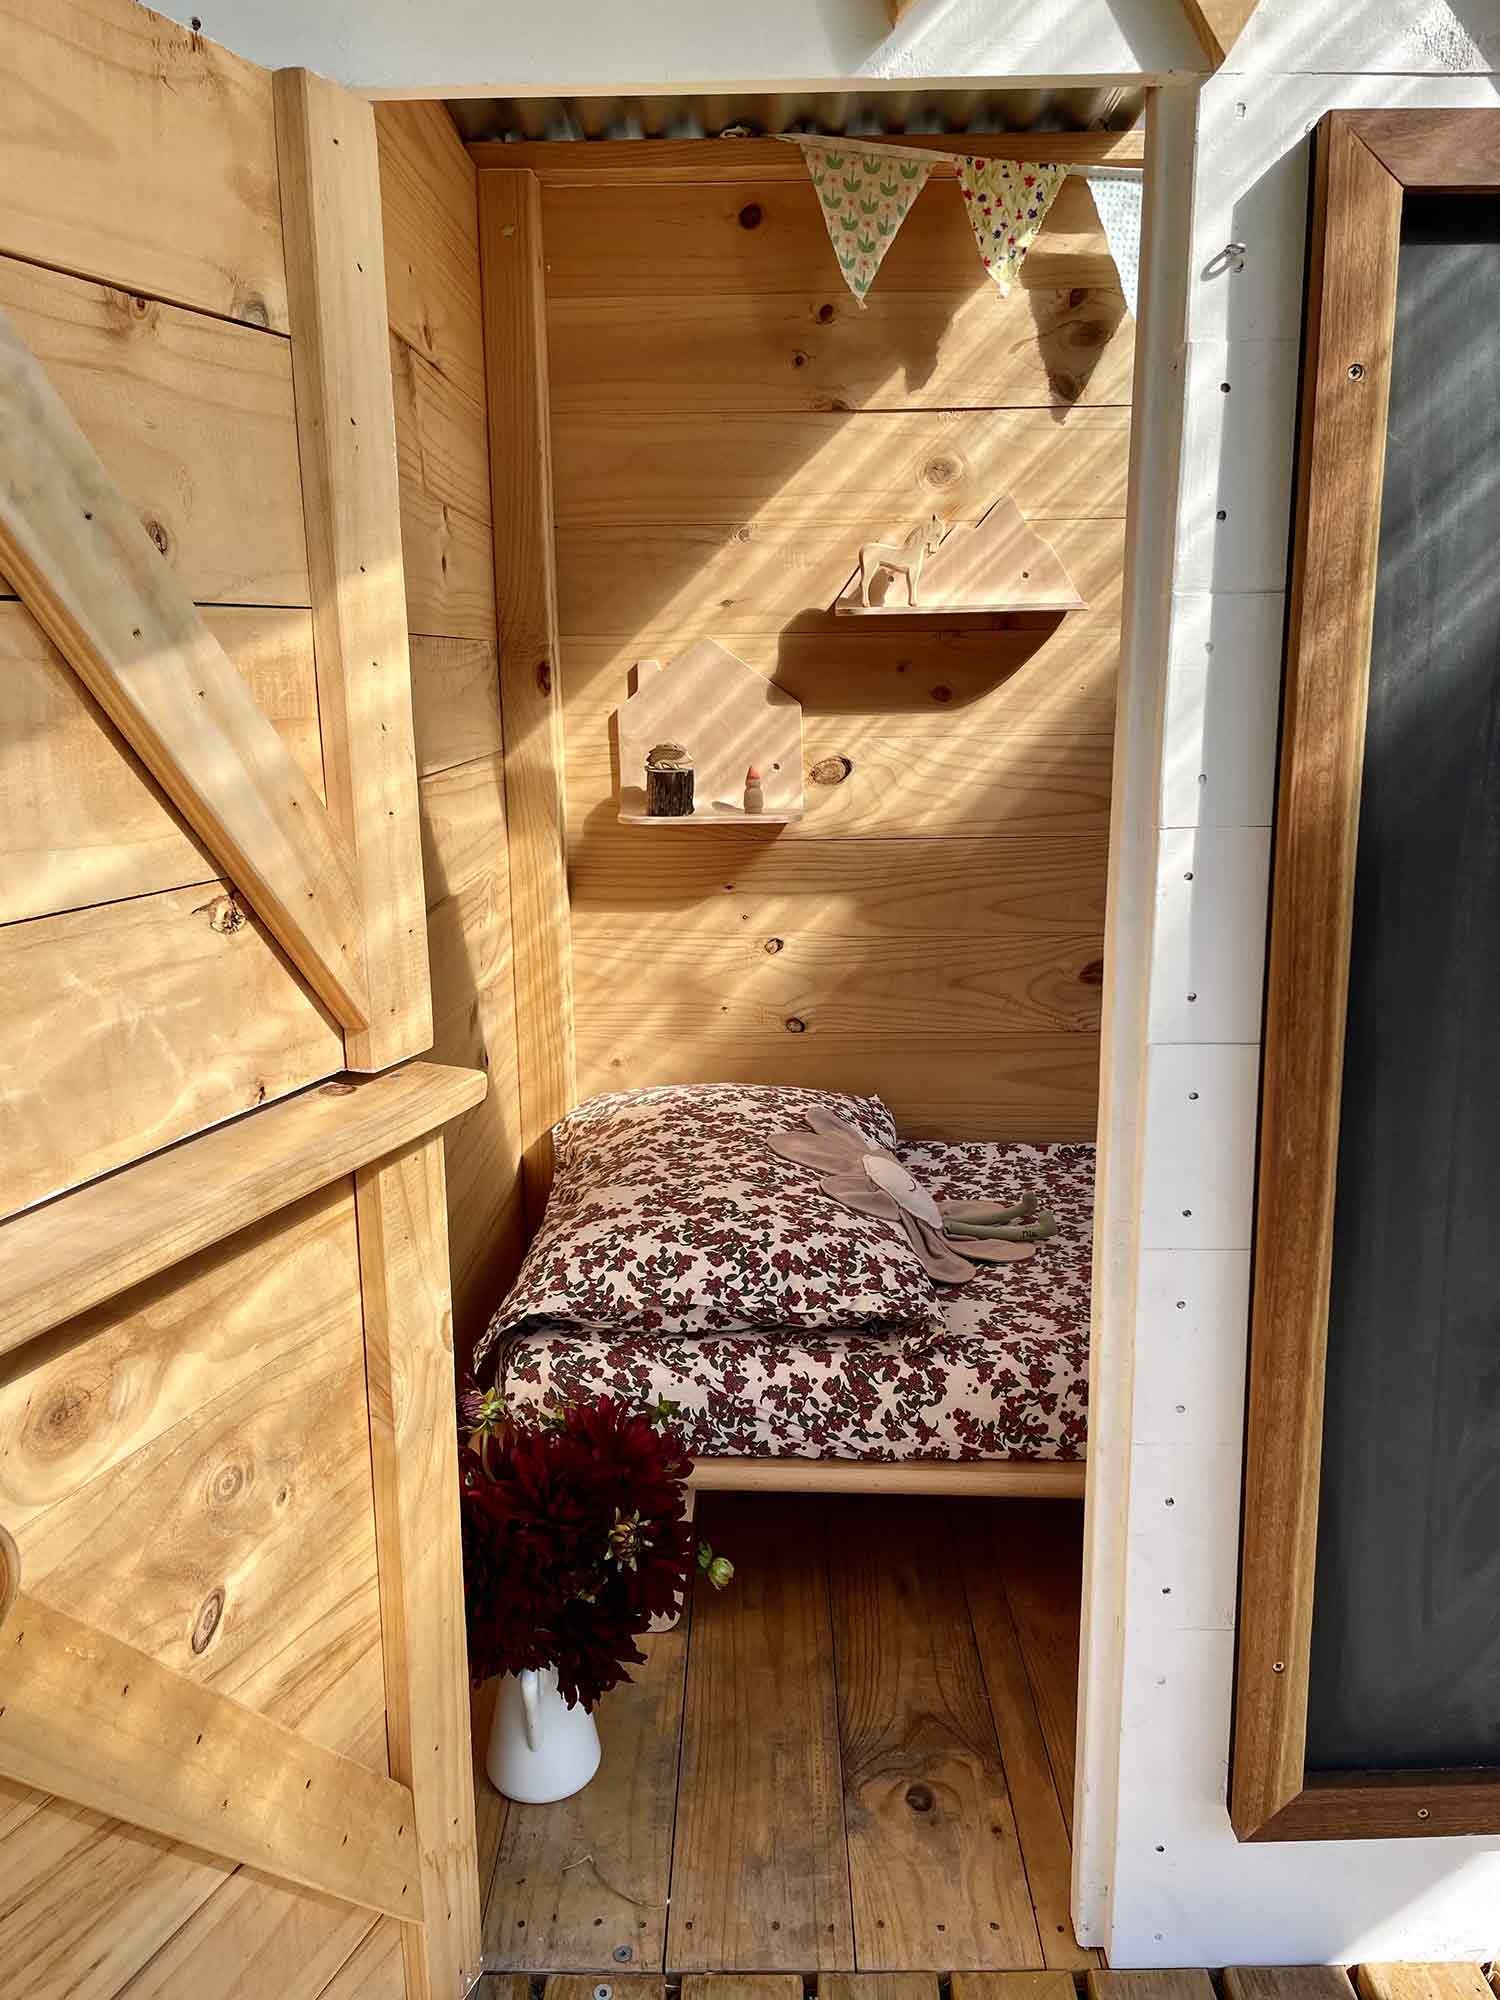 A bed for outdoor sleep over sin their wooden cubby house